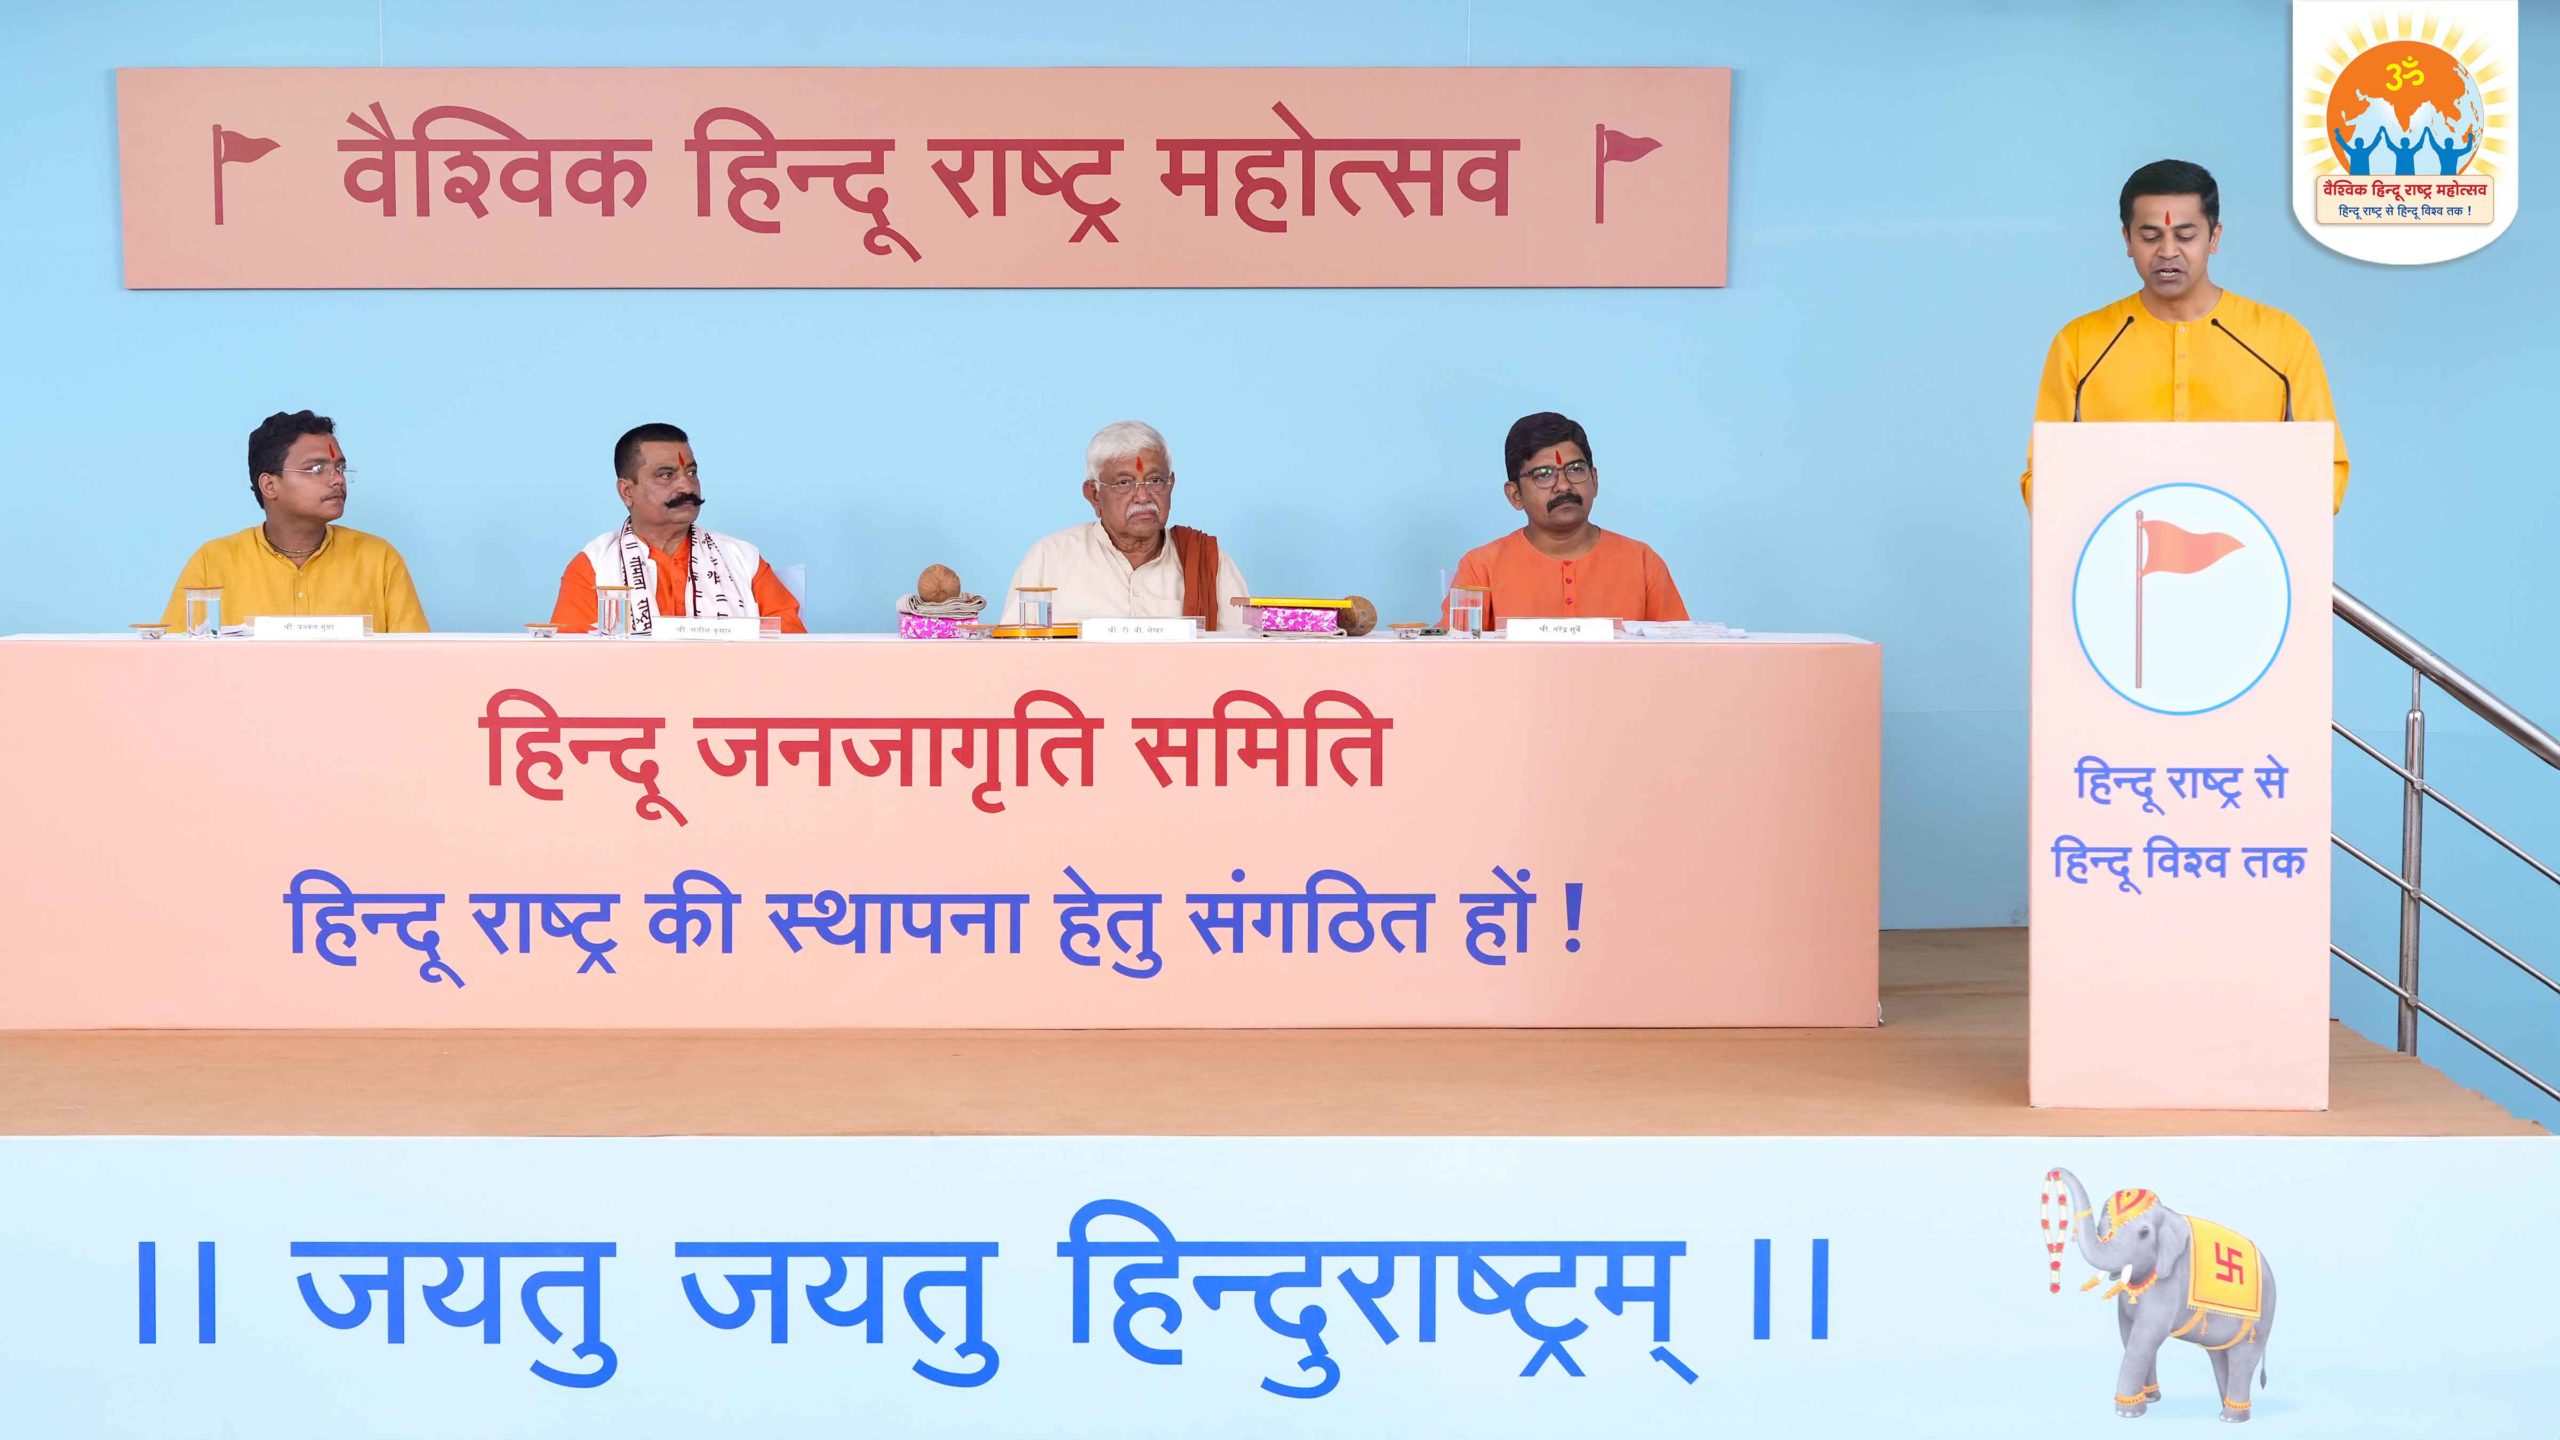 Devout Hindus participating in a session on - 'Safeguarding the Nation and protecting Dharma'